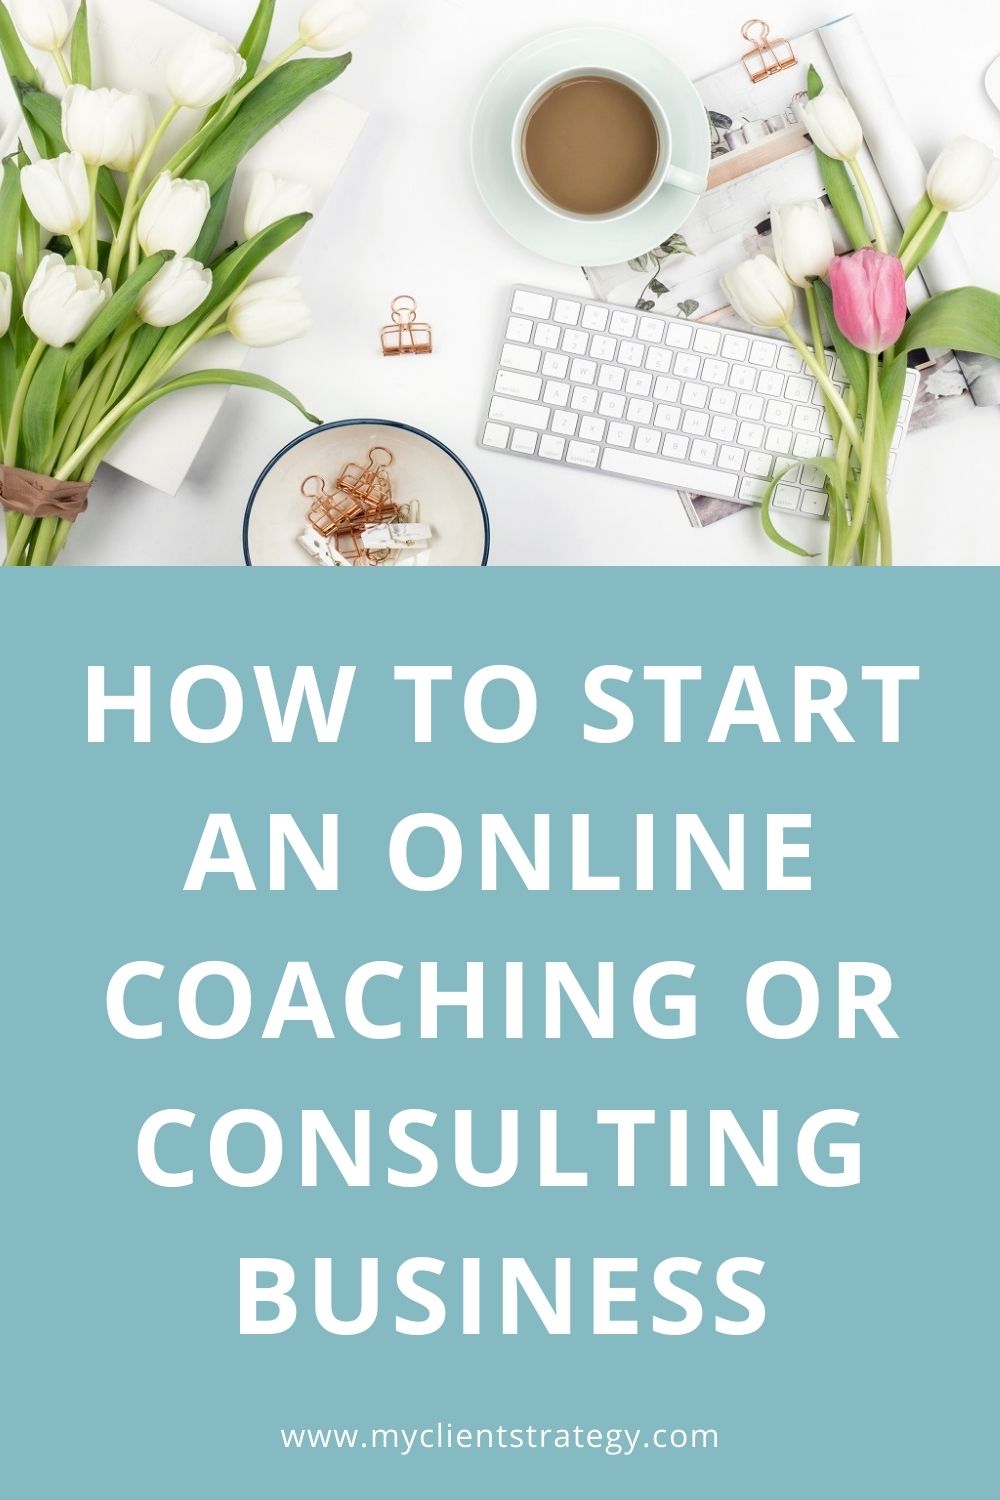 How to start an online coaching or consulting business